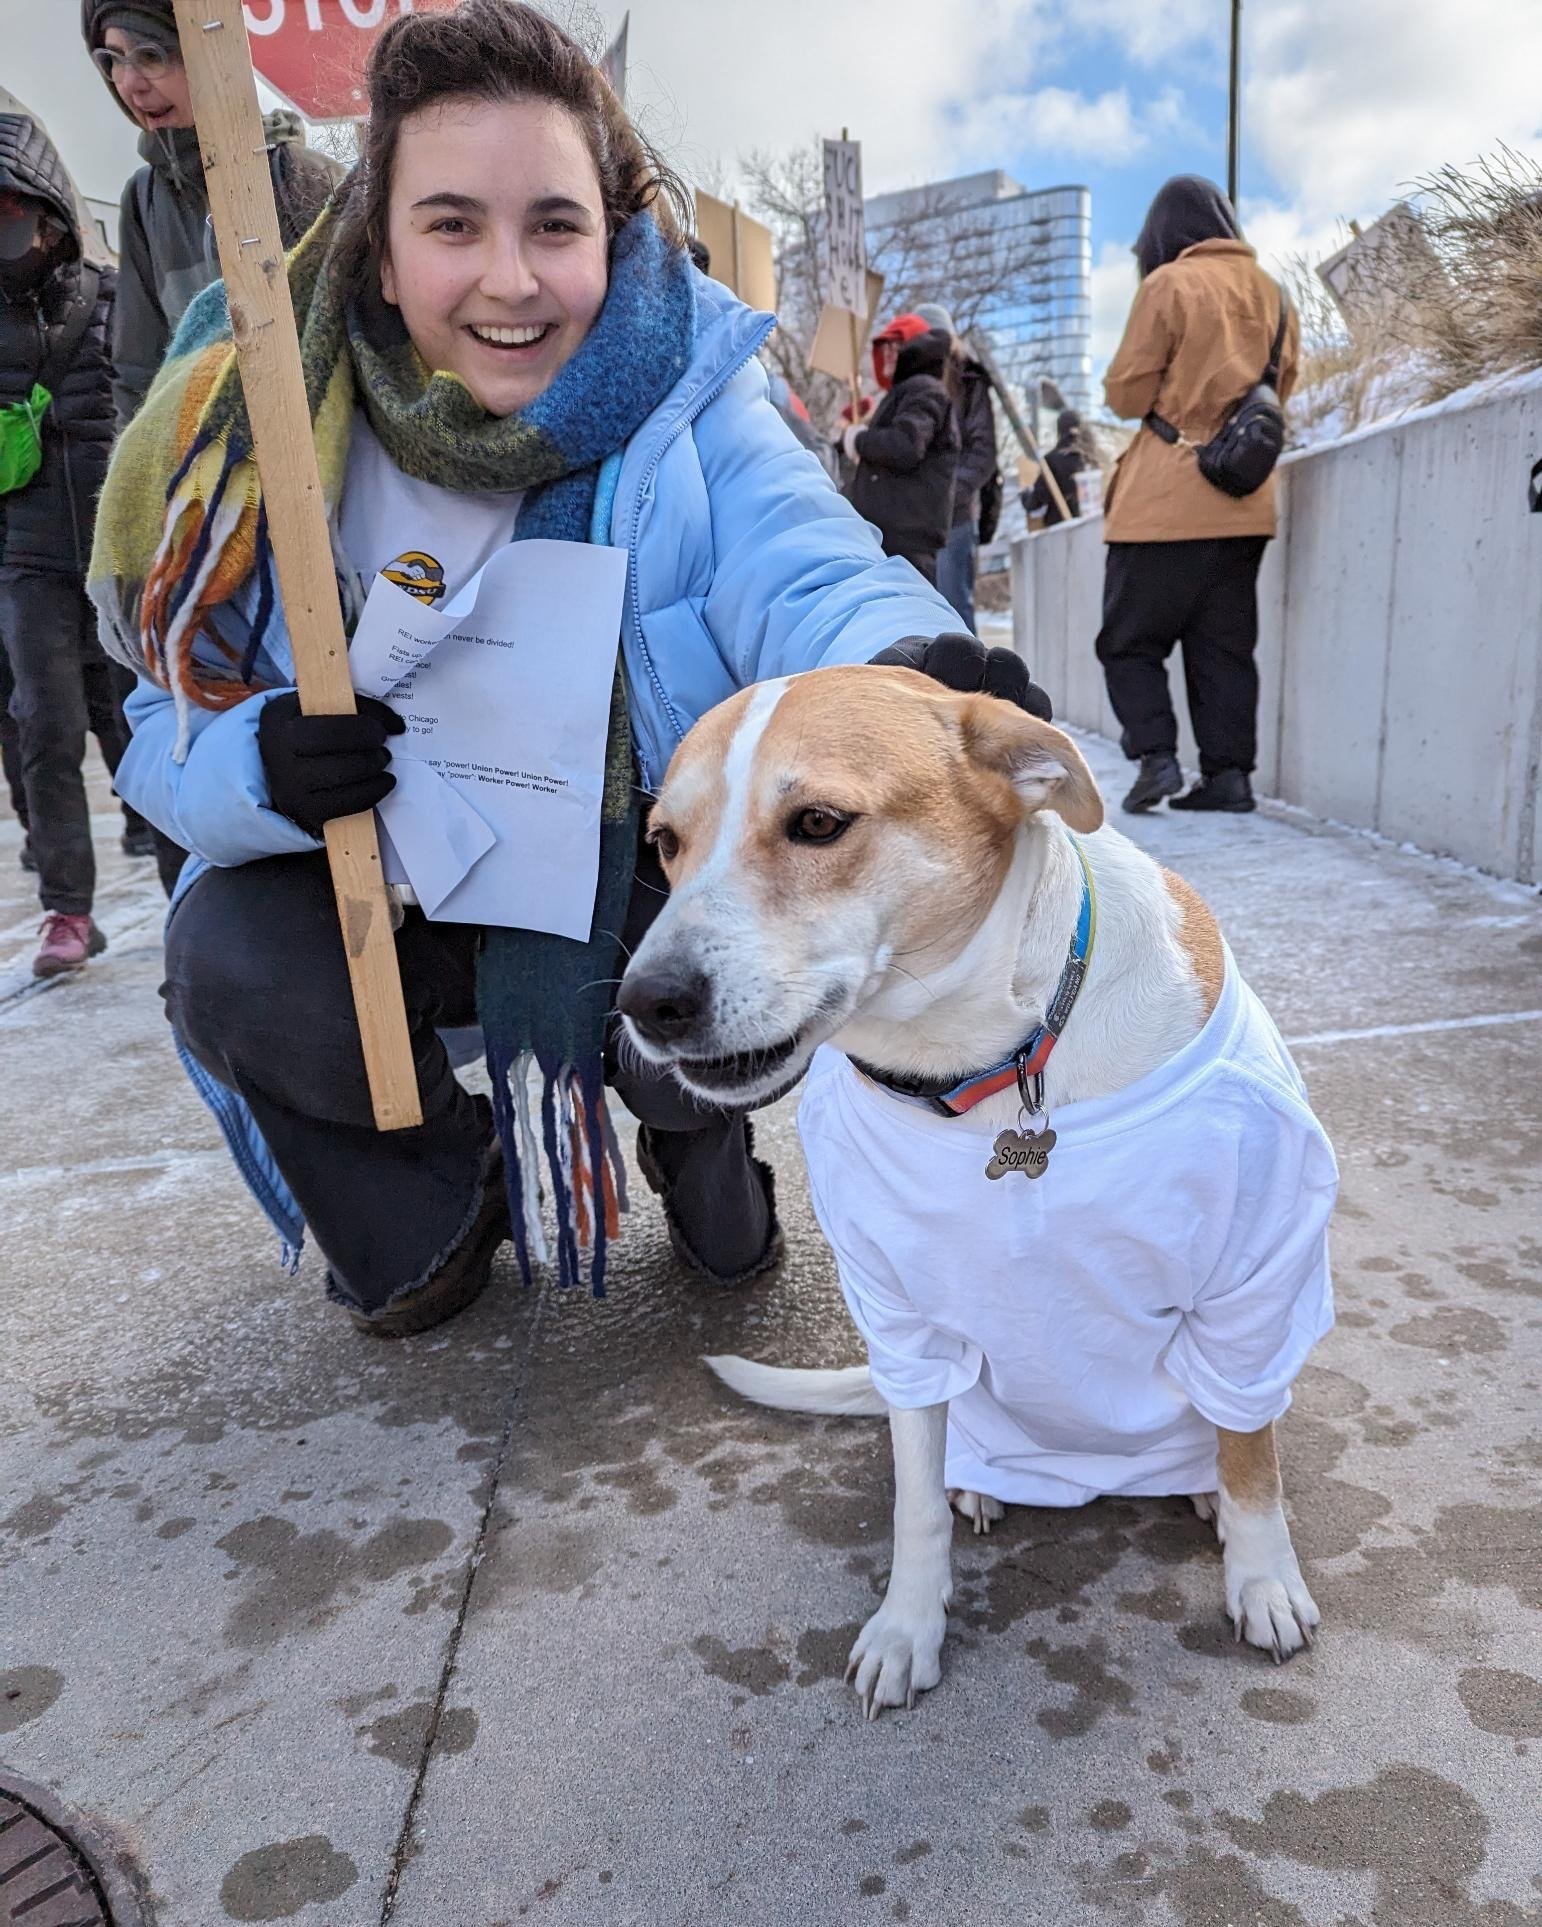 Happy #NationalPetDay from this @reiunion dog who supported @reiunionchicago workers on their ULP strike picket line back in February! Post your union pets and tag us!